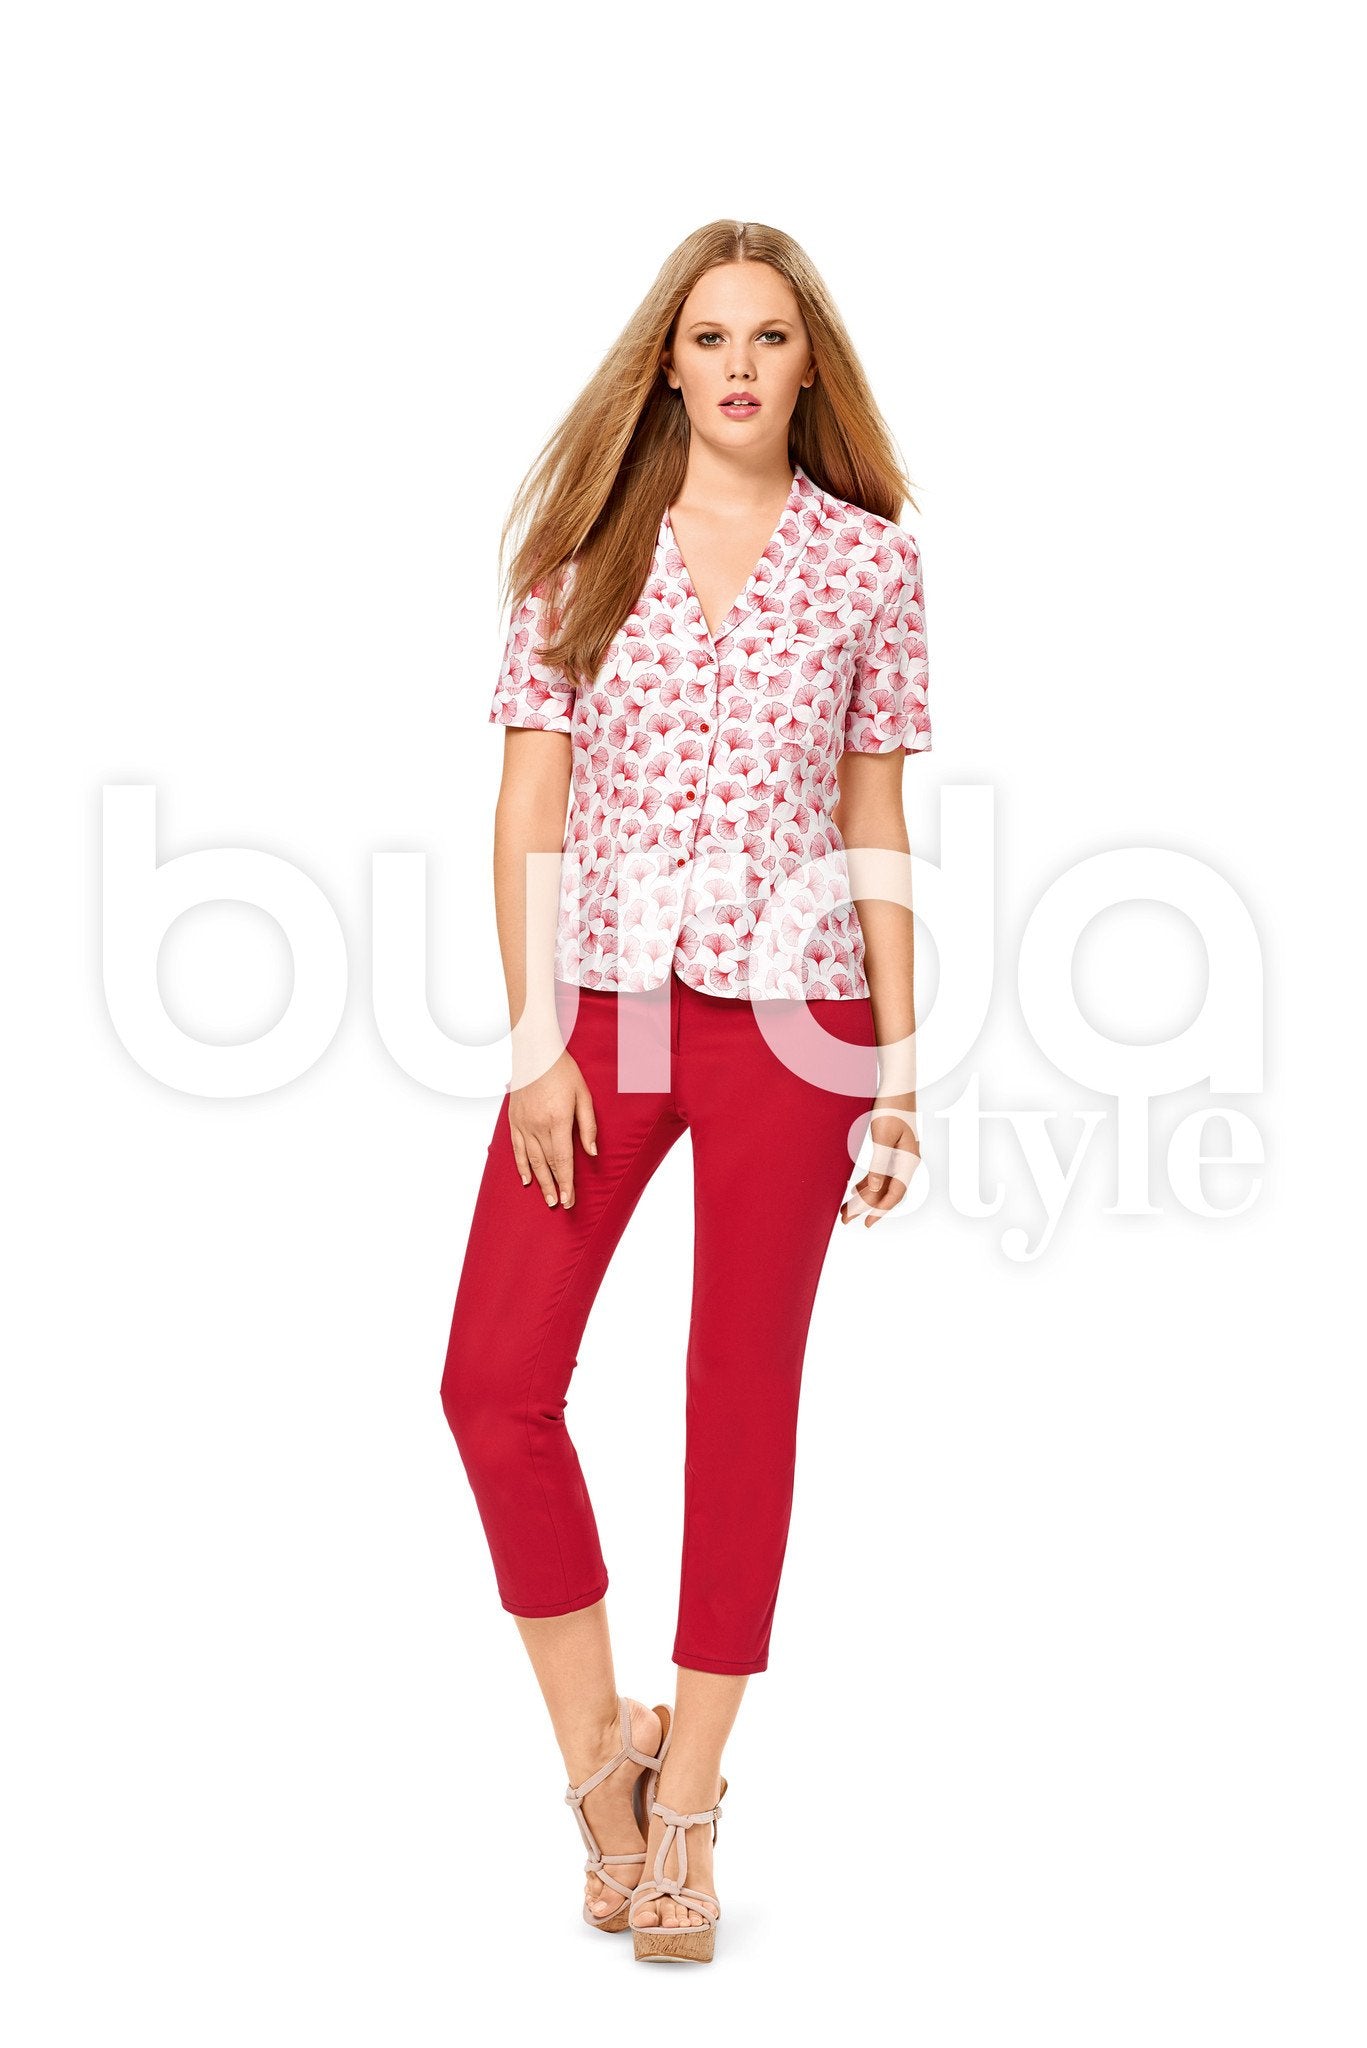 Burda Style Pattern BD6533 Misses' Blouse from Jaycotts Sewing Supplies